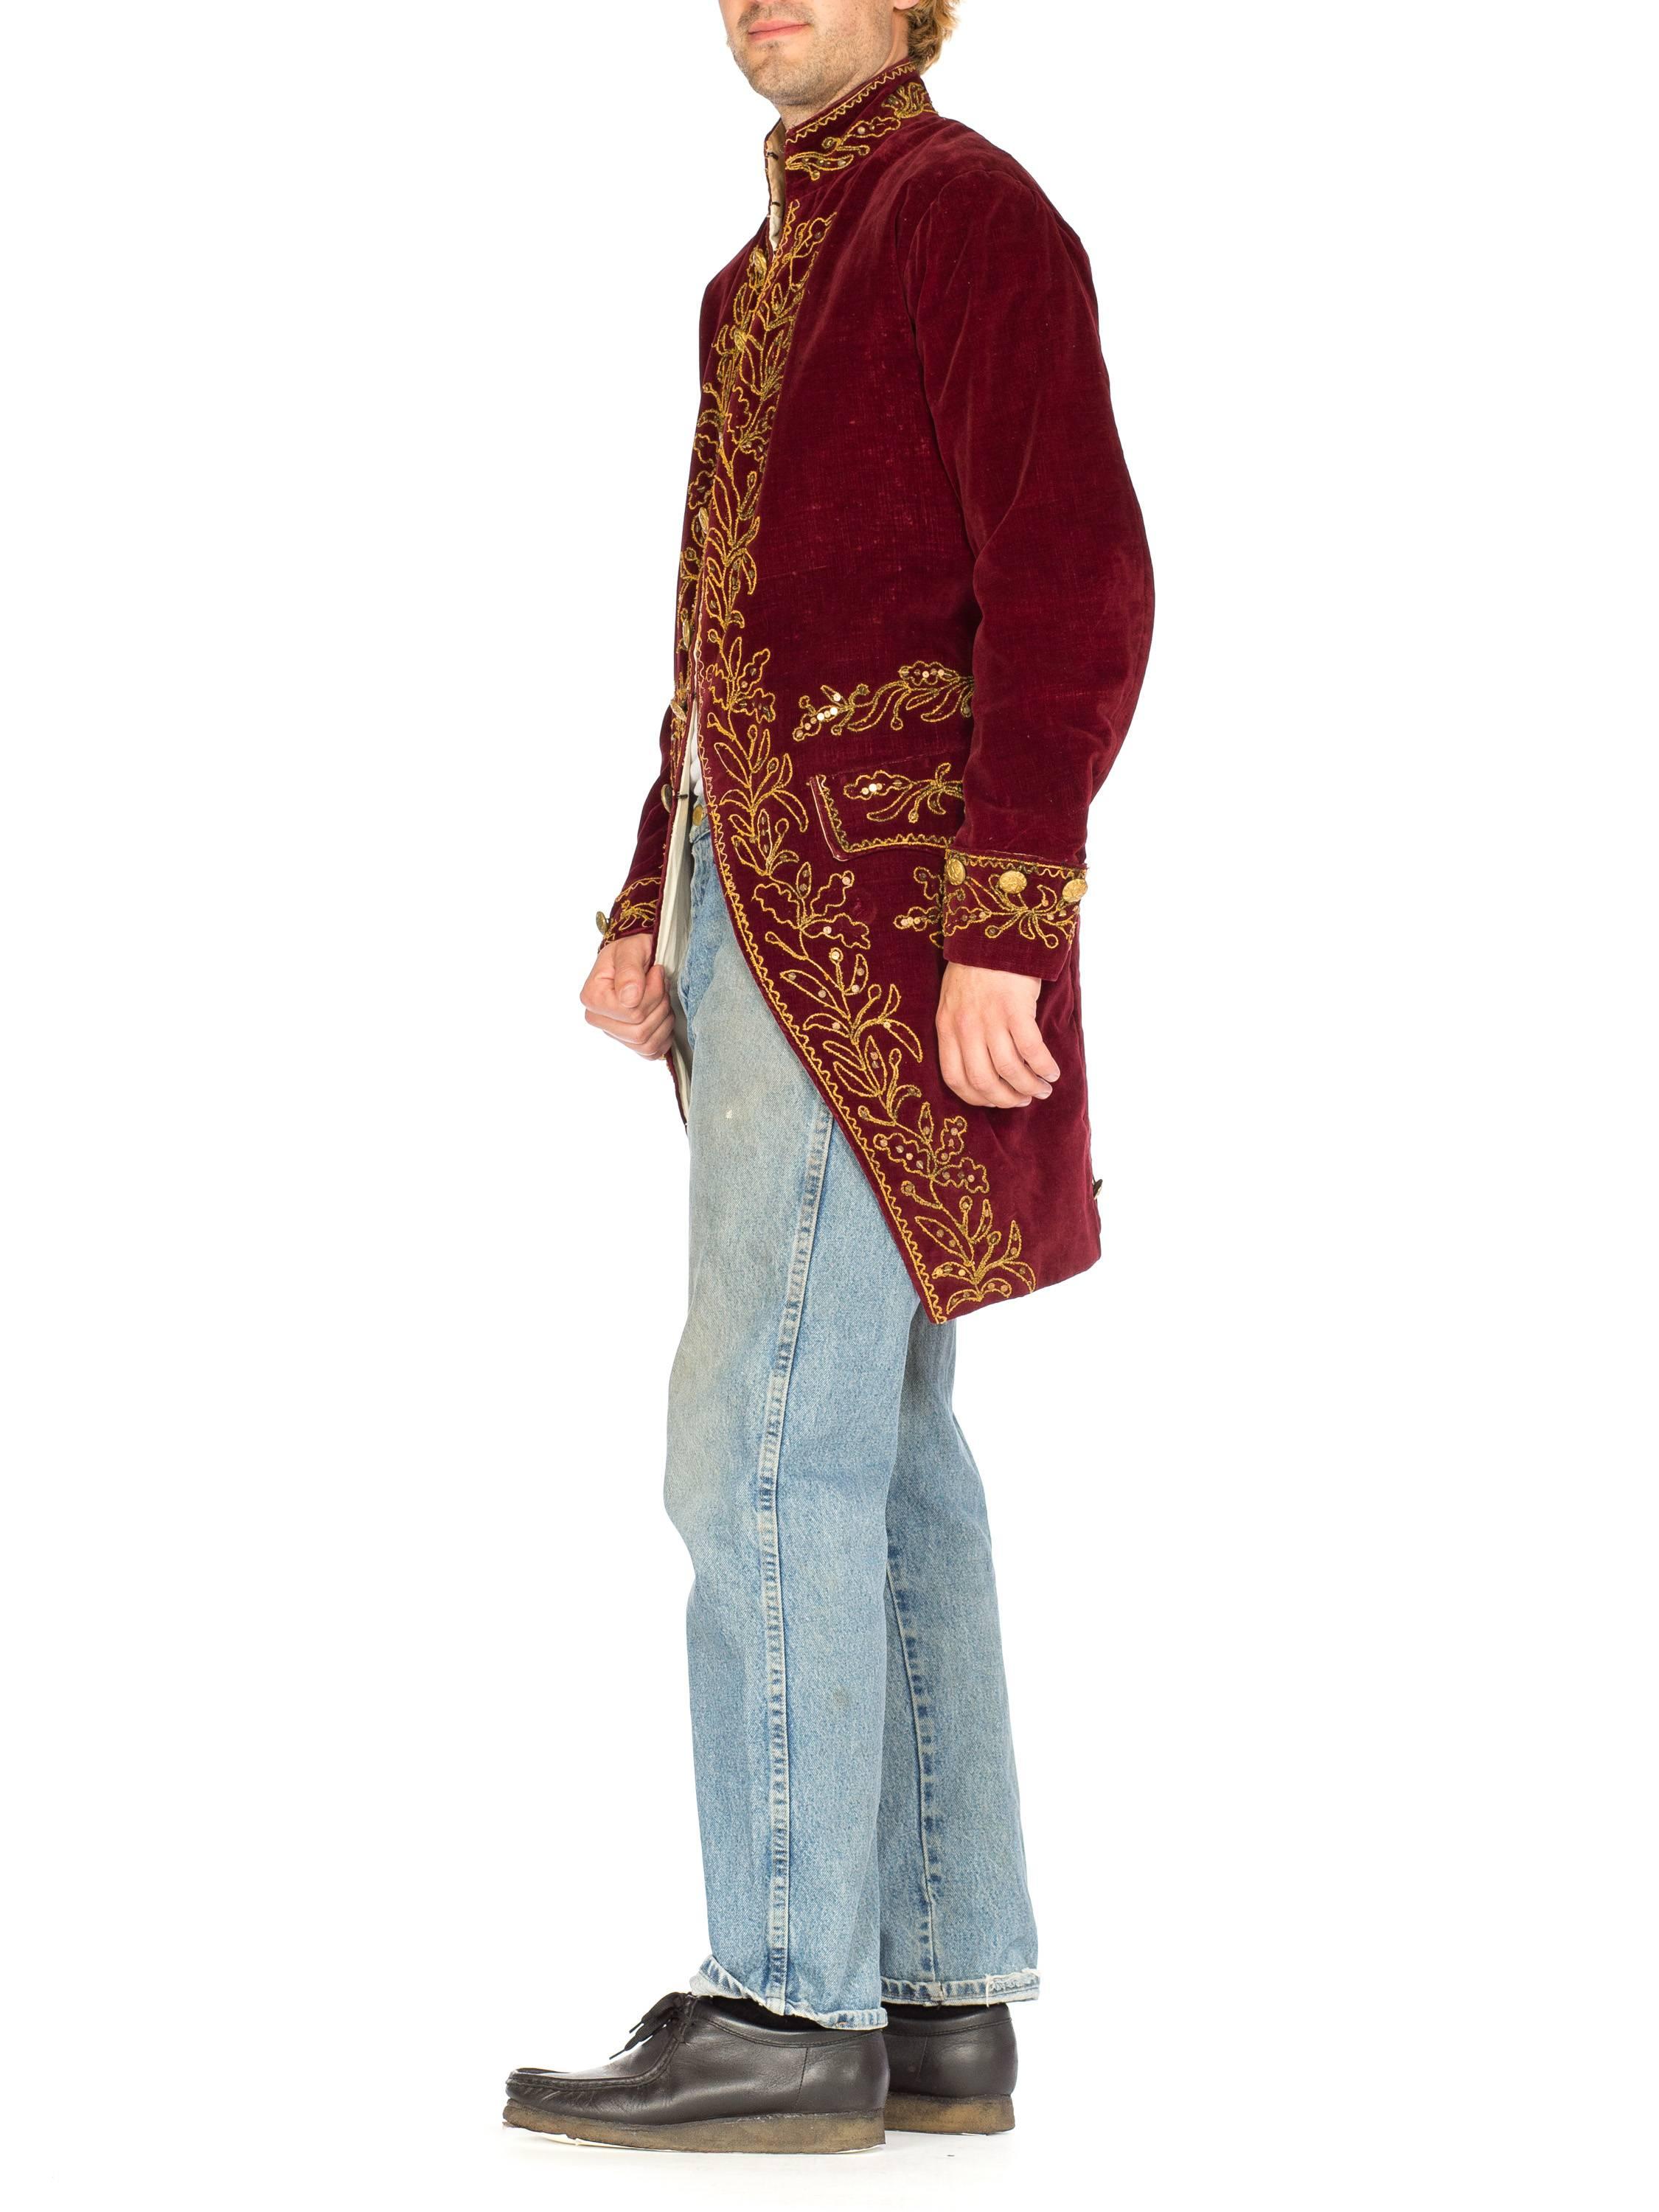 Women's or Men's Antique 18th Century Style Velvet Victorian Frock Coat with Gold Embroidery